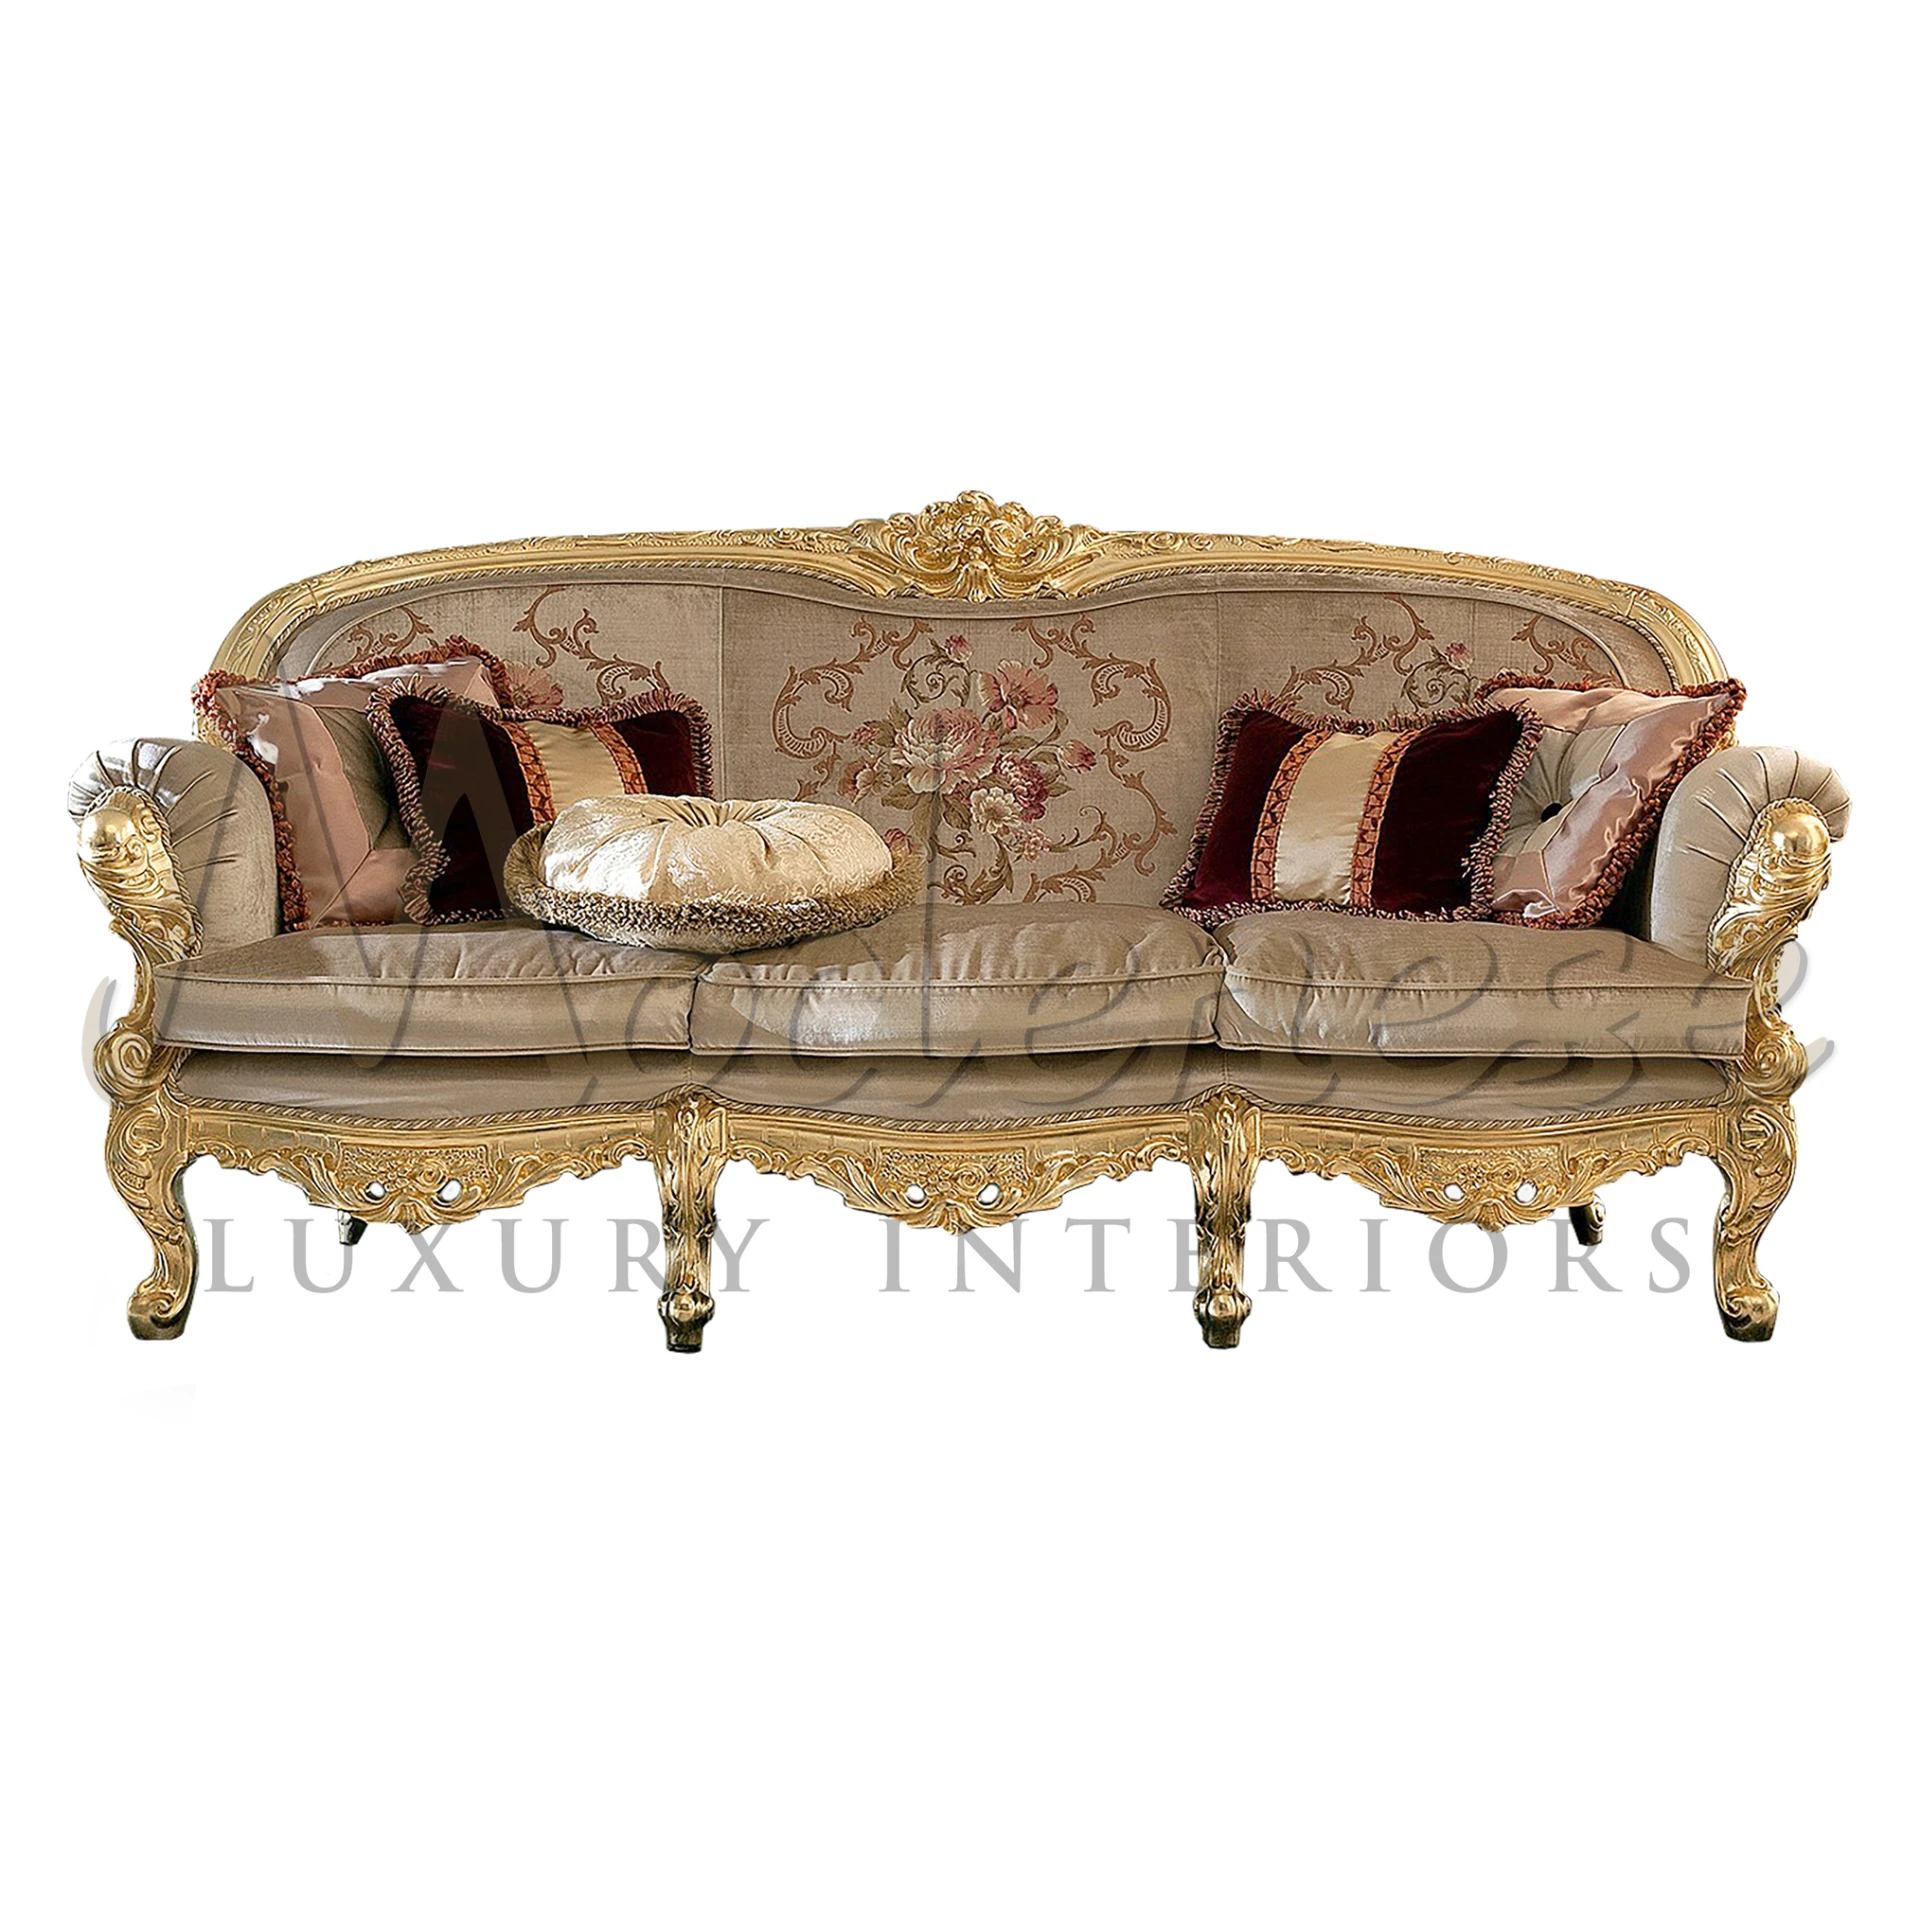 Transport yourself to the grandeur of French chateaus with our Golden Beige Floral Sofa. 